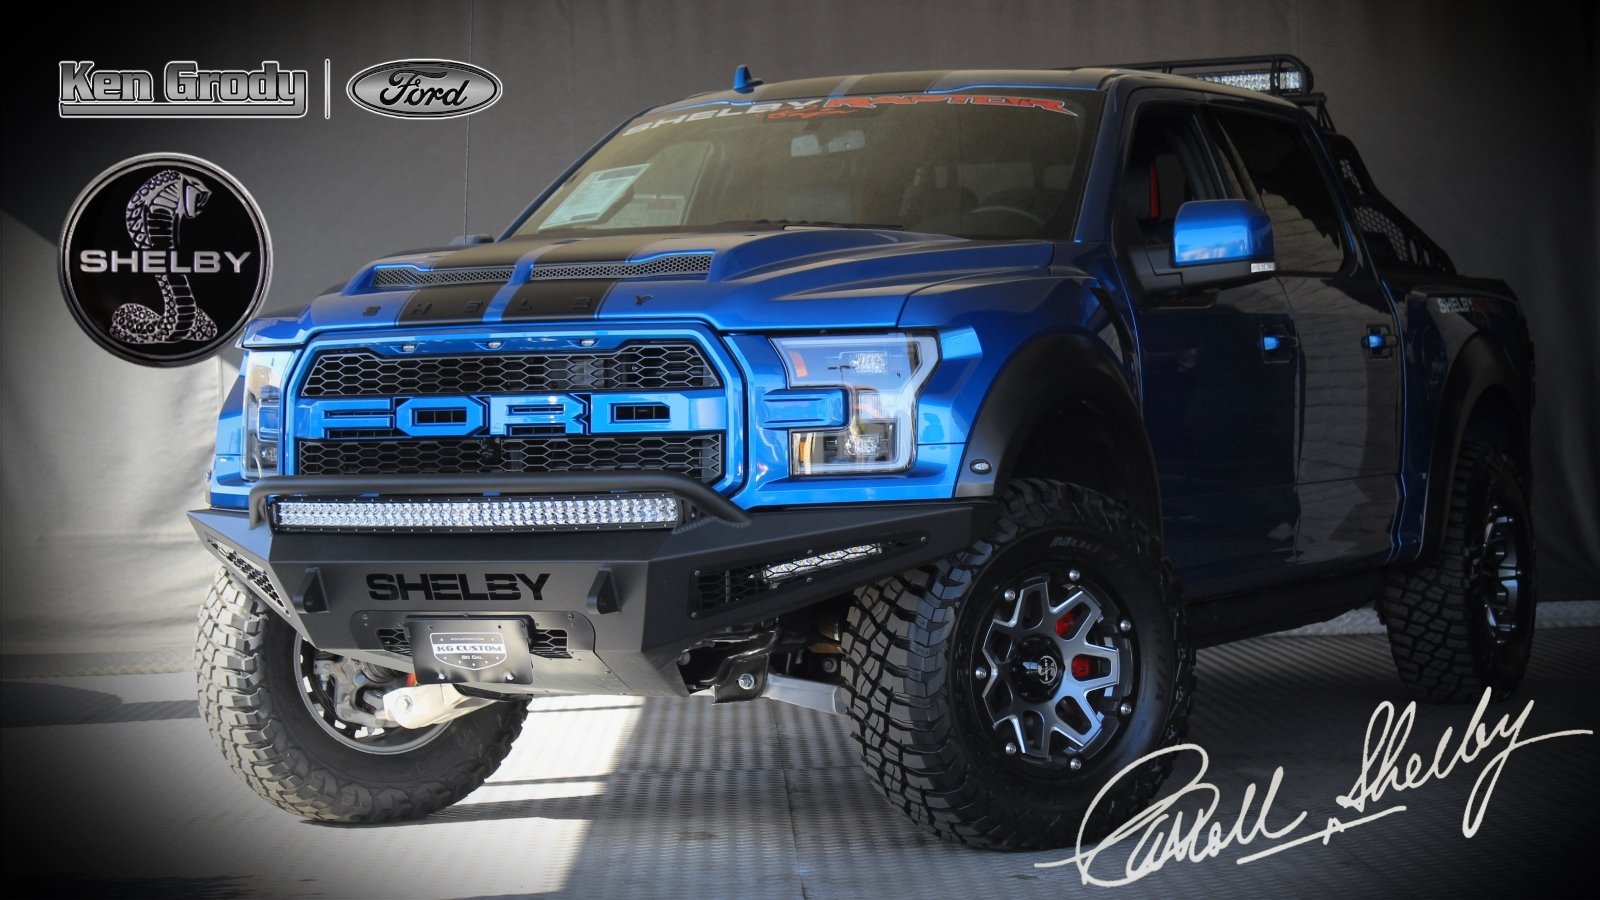 Ford Raptor Shelby 2019 2019 Ford F150 Shelby Raptor 2019